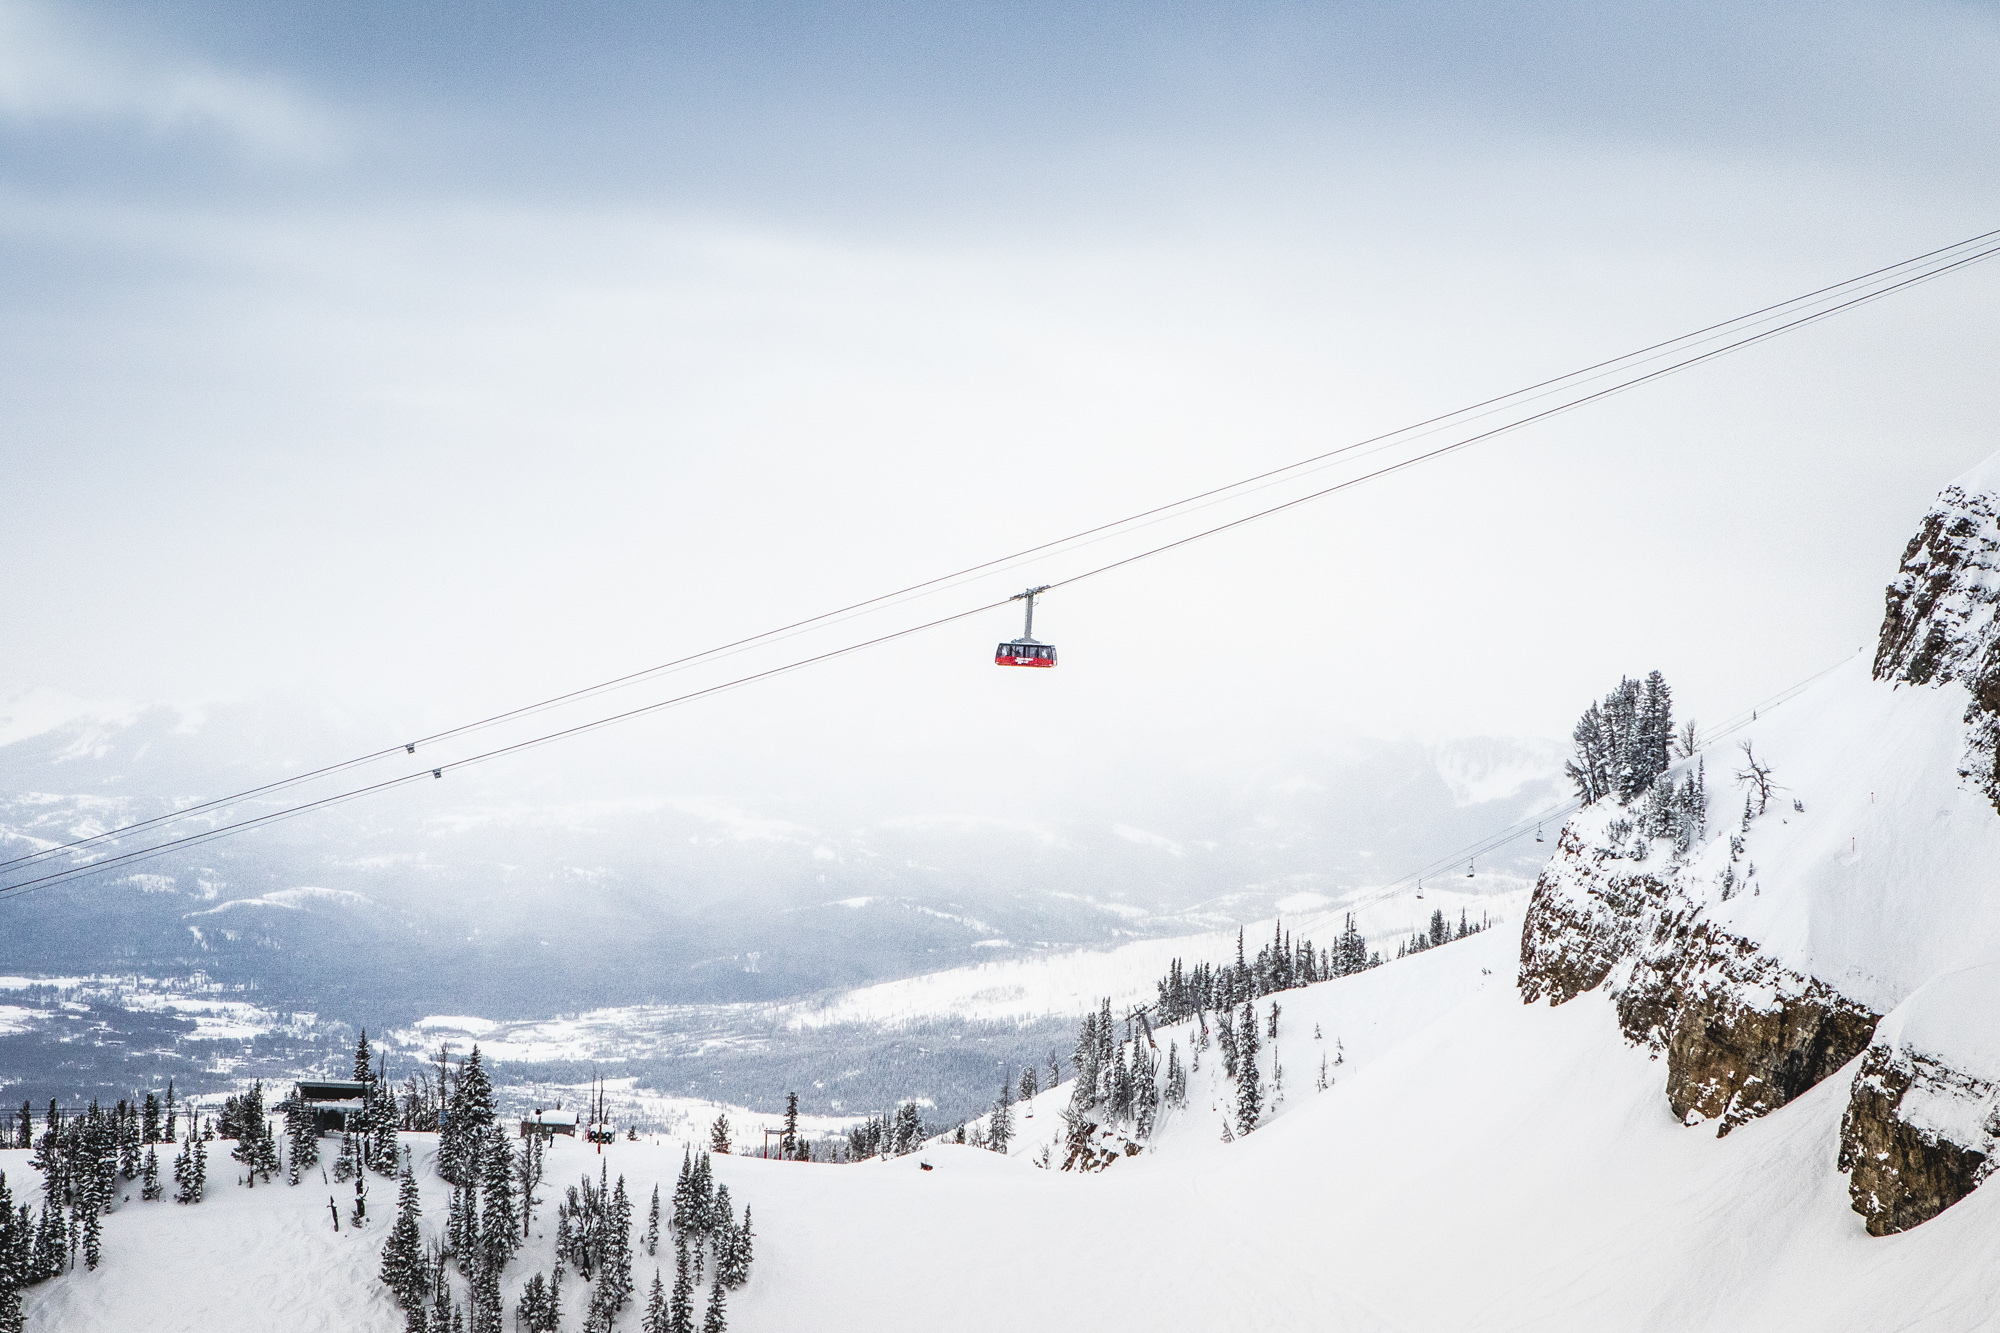 Snow-covered peaks unfold as a cable car glides, revealing a wondrous, breathtaking snowy panorama.